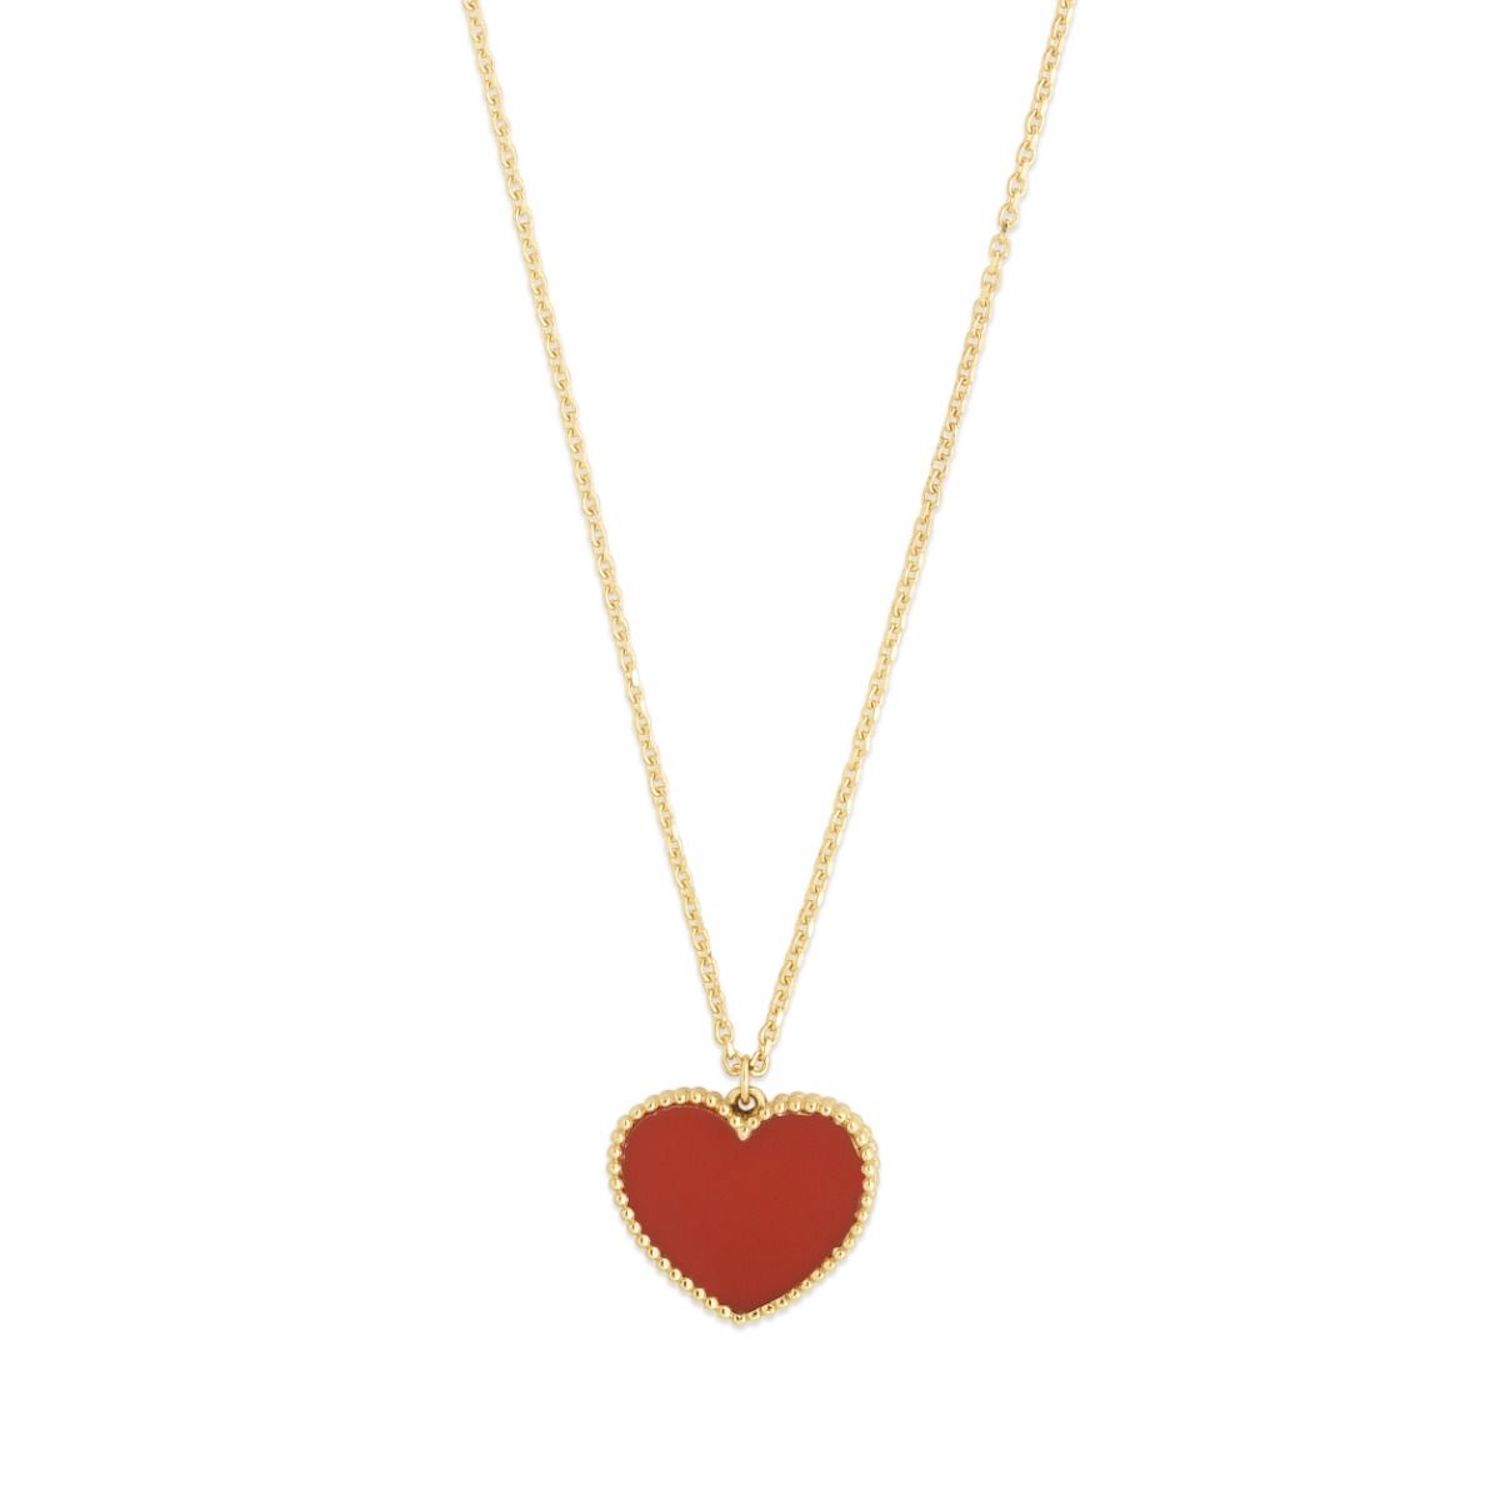 14K Yellow Gold Red Carnelian Heart Pendant Necklace 17"-18" Adjustable